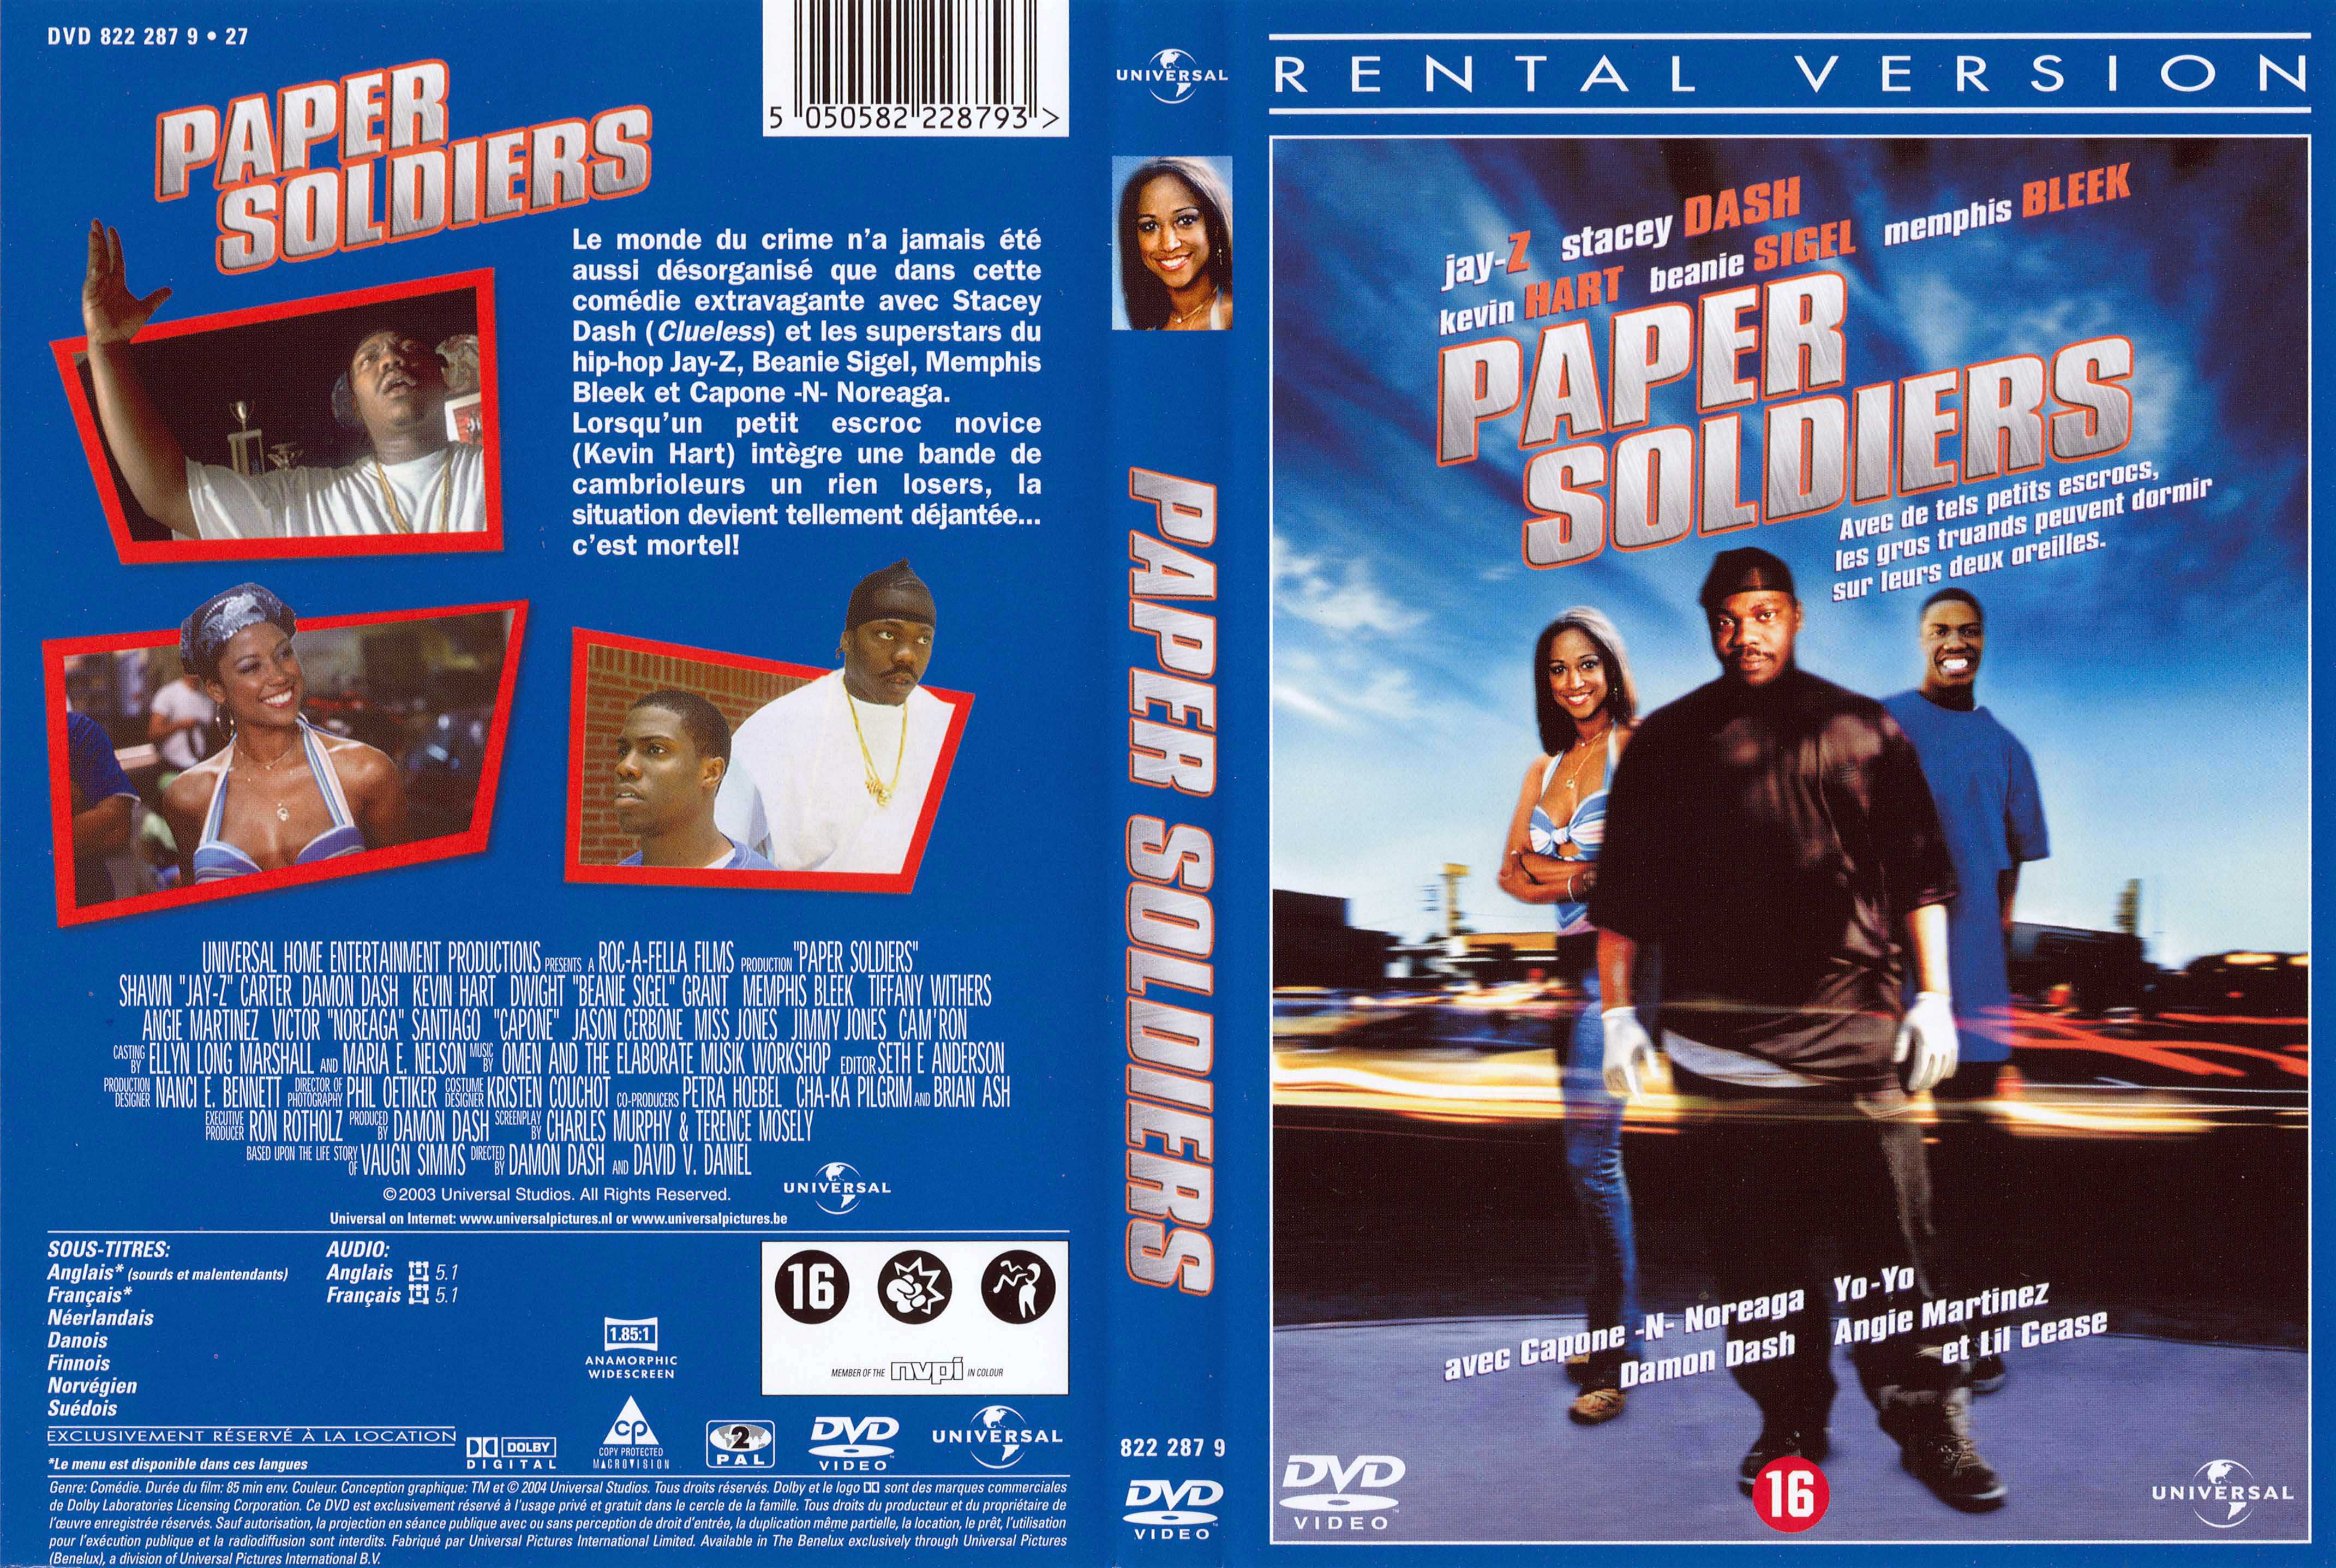 Jaquette DVD Paper soldiers